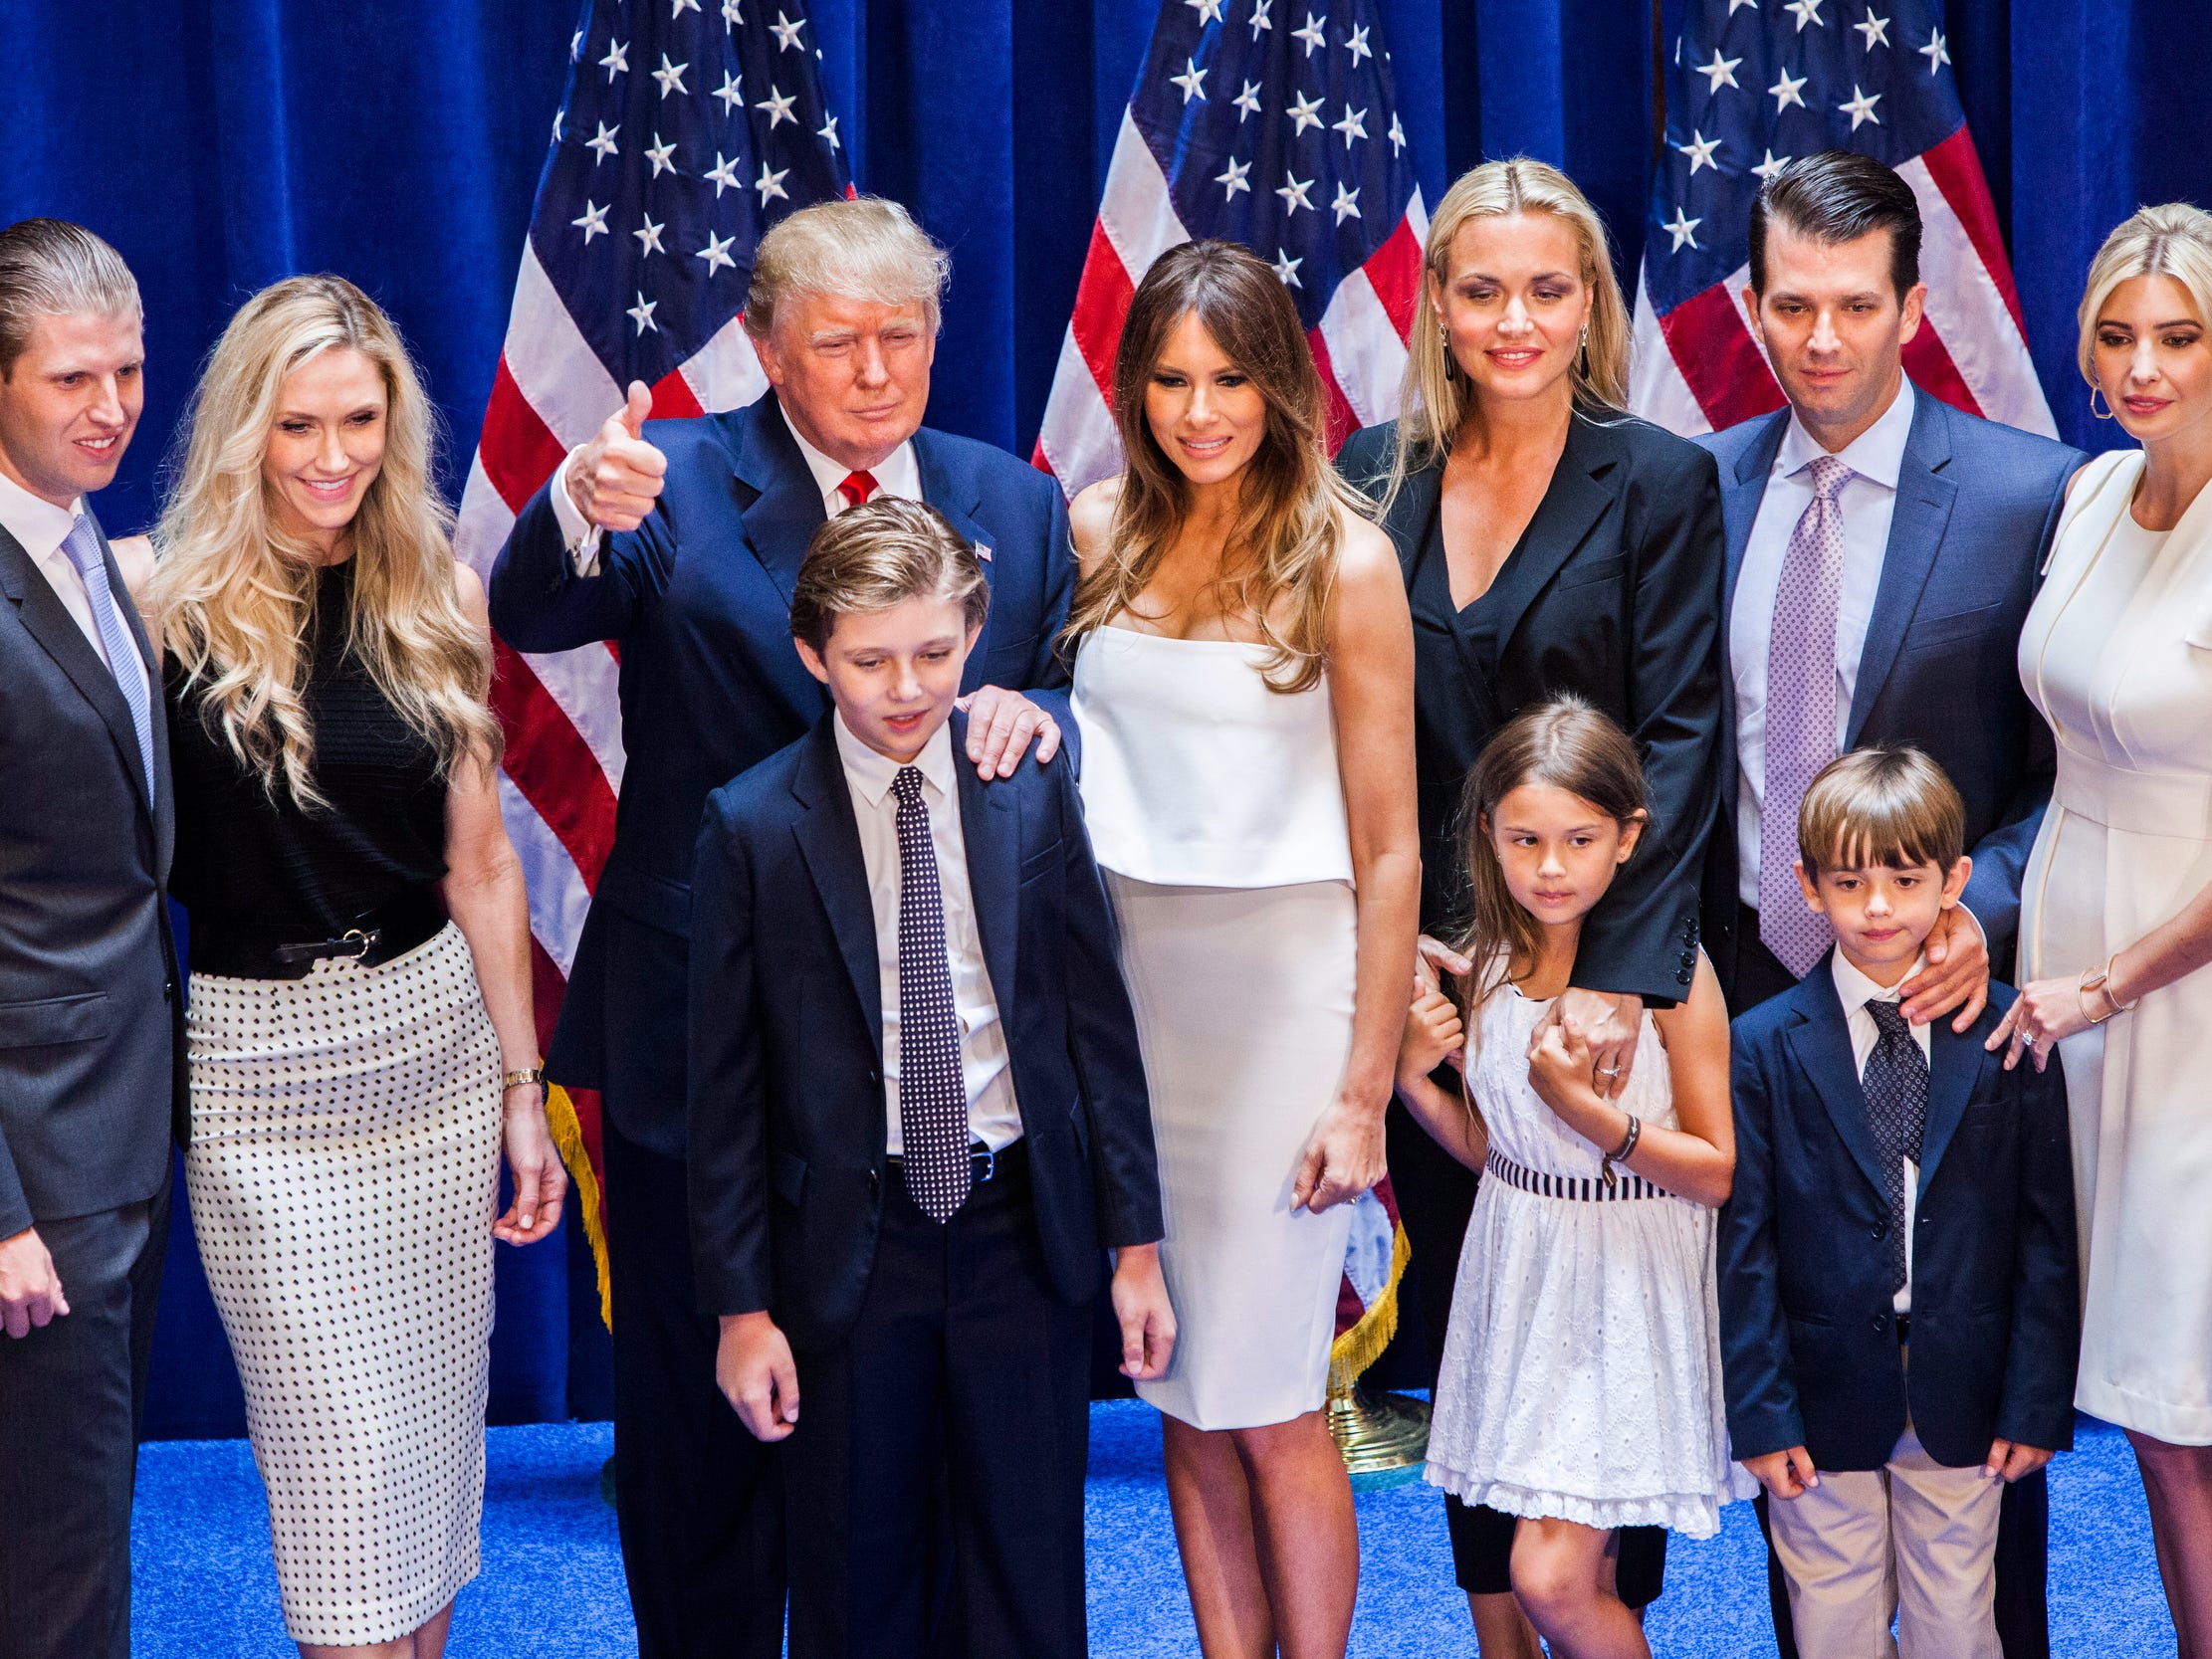 <p>Melania Trump and Barron, however, did not immediately move to the White House, staying in New York City until the end of Barron's school year. It was a pricey decision, with <a href="https://www.businessinsider.com/secret-service-cost-trump-2017-3">security costing roughly $27 million</a>.</p>